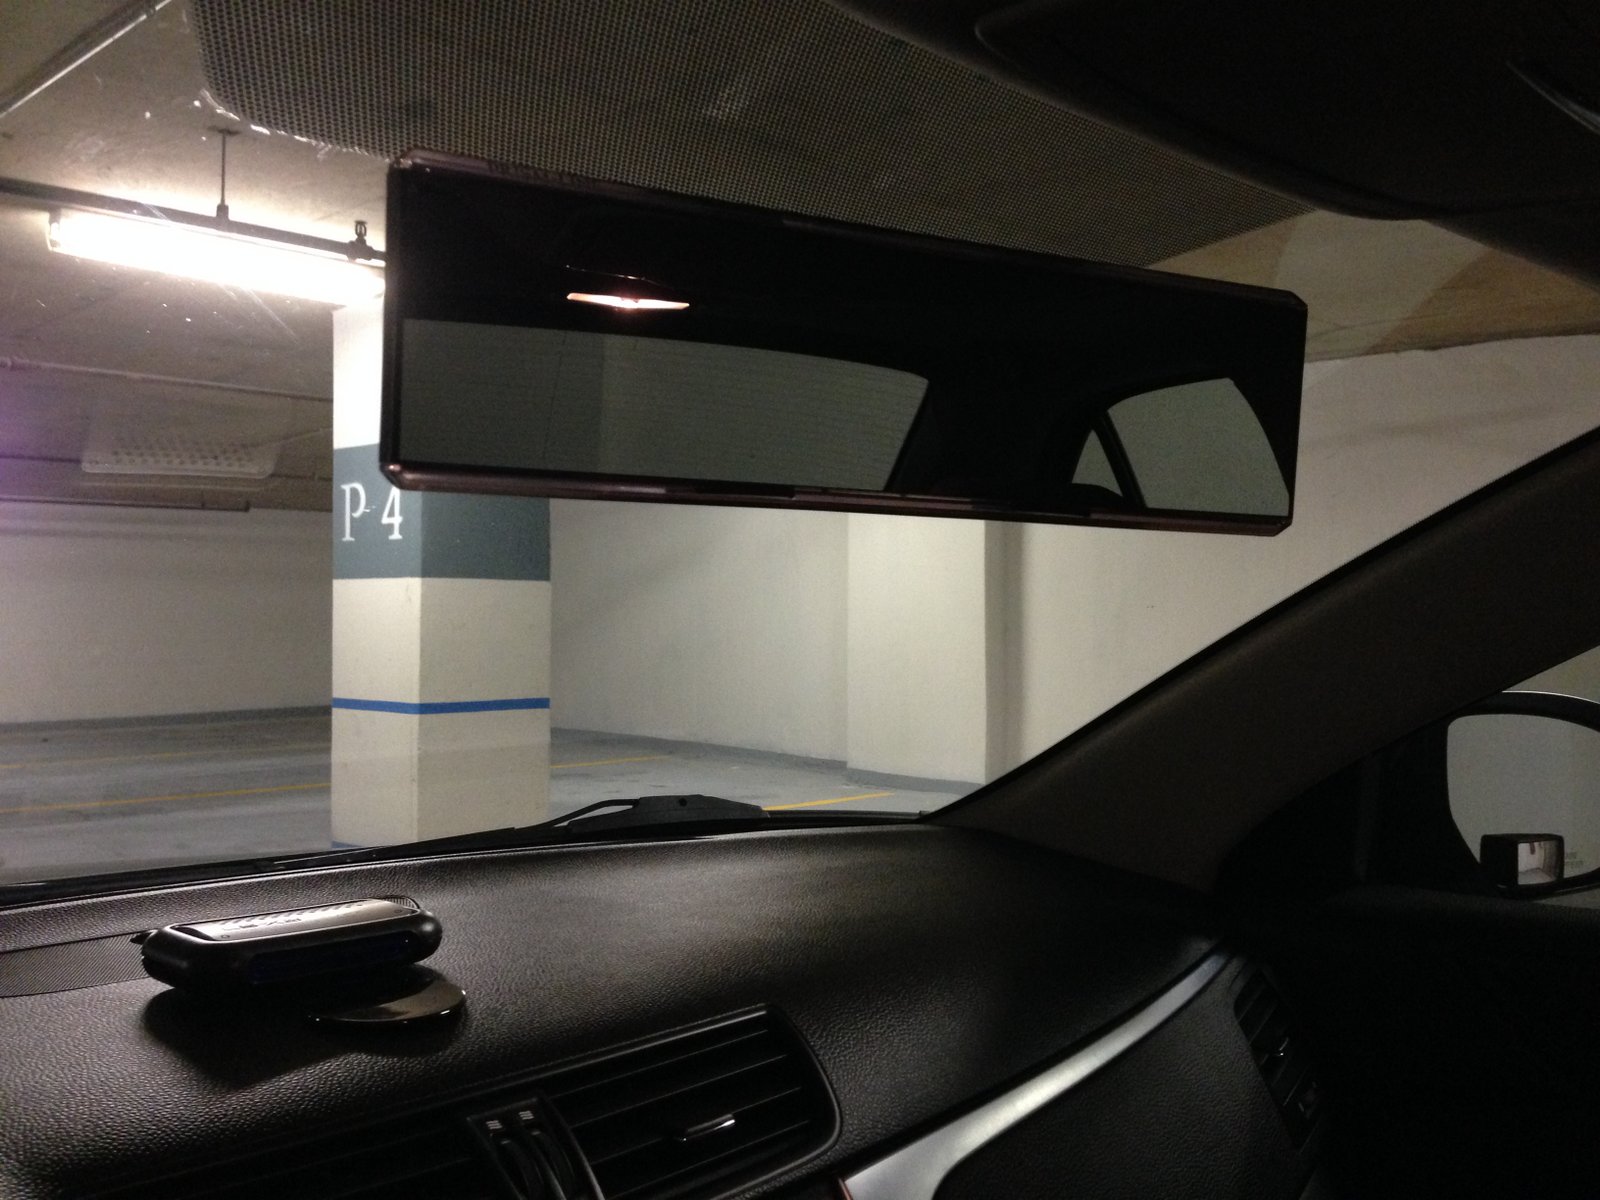 JDM Flat mirror for larger rear viewing area.